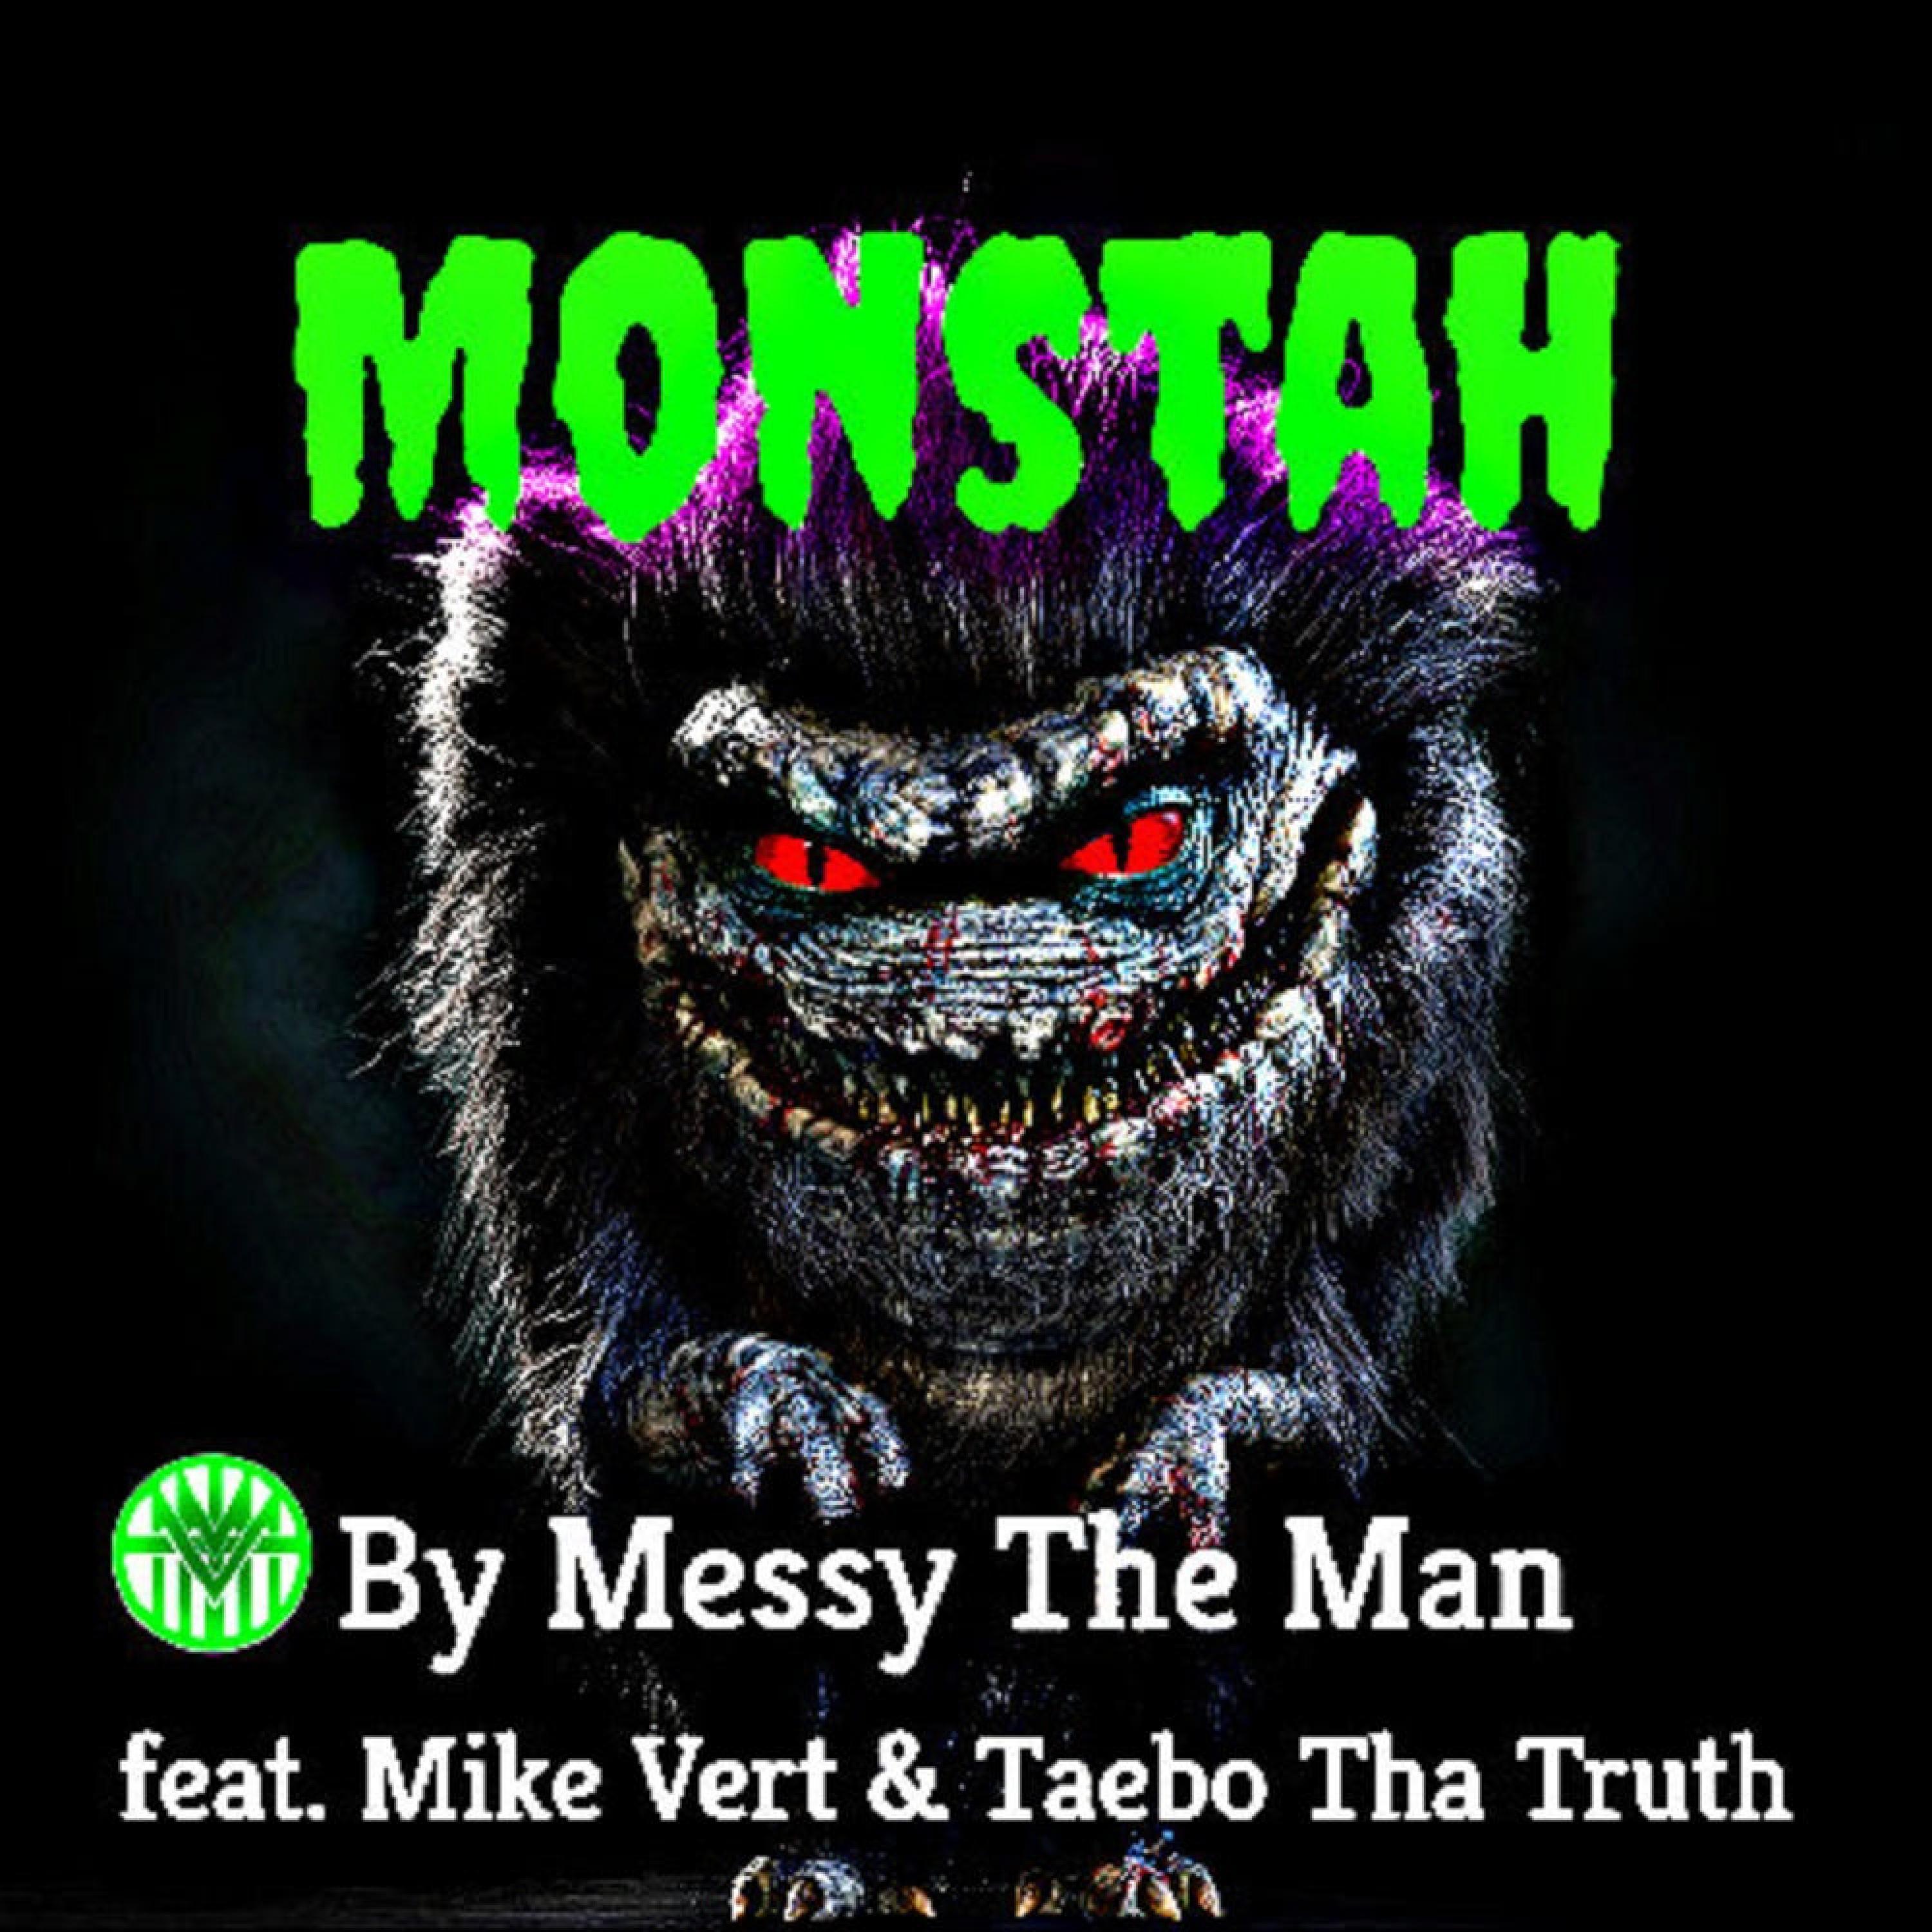 Messy the Man - Monstah (feat. Mike Vertical & Taebo Tha Truth)